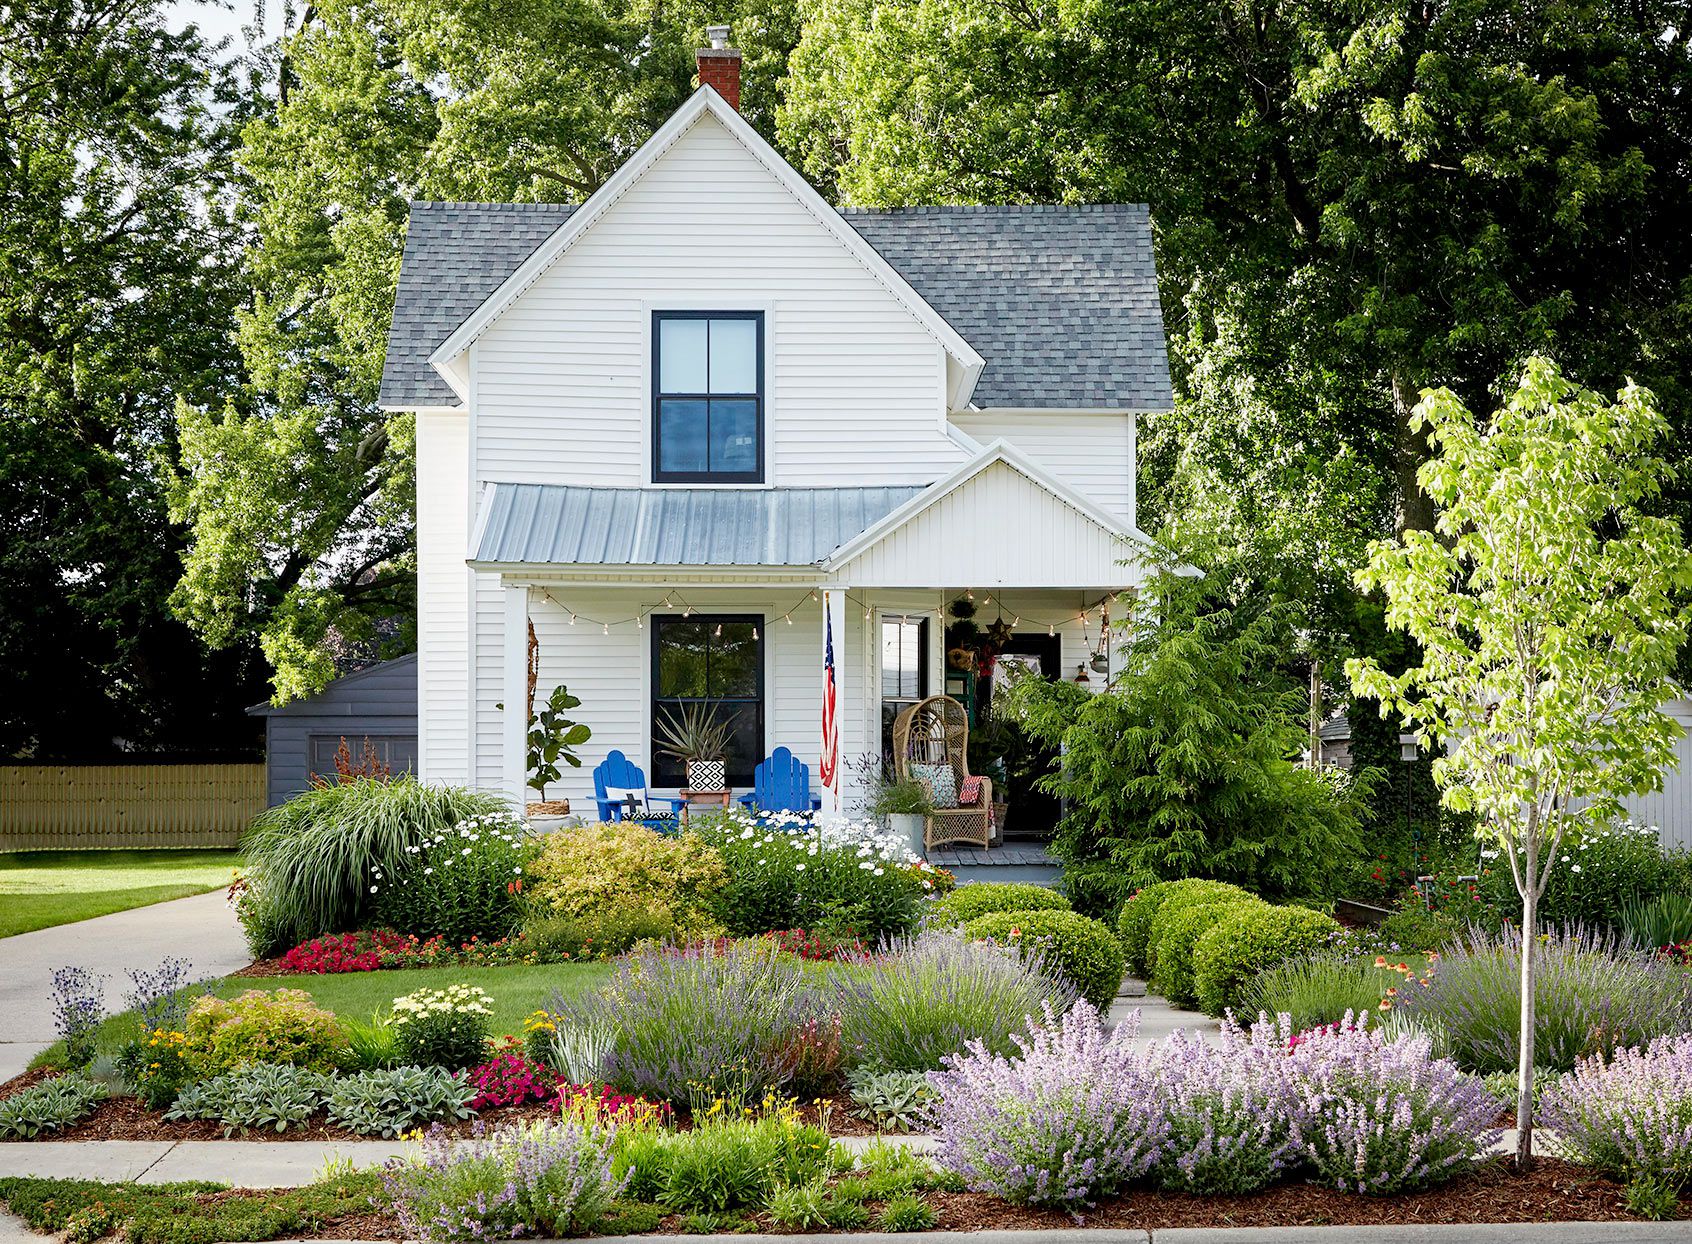 How Much Does Landscaping Add To The Value Of A Home